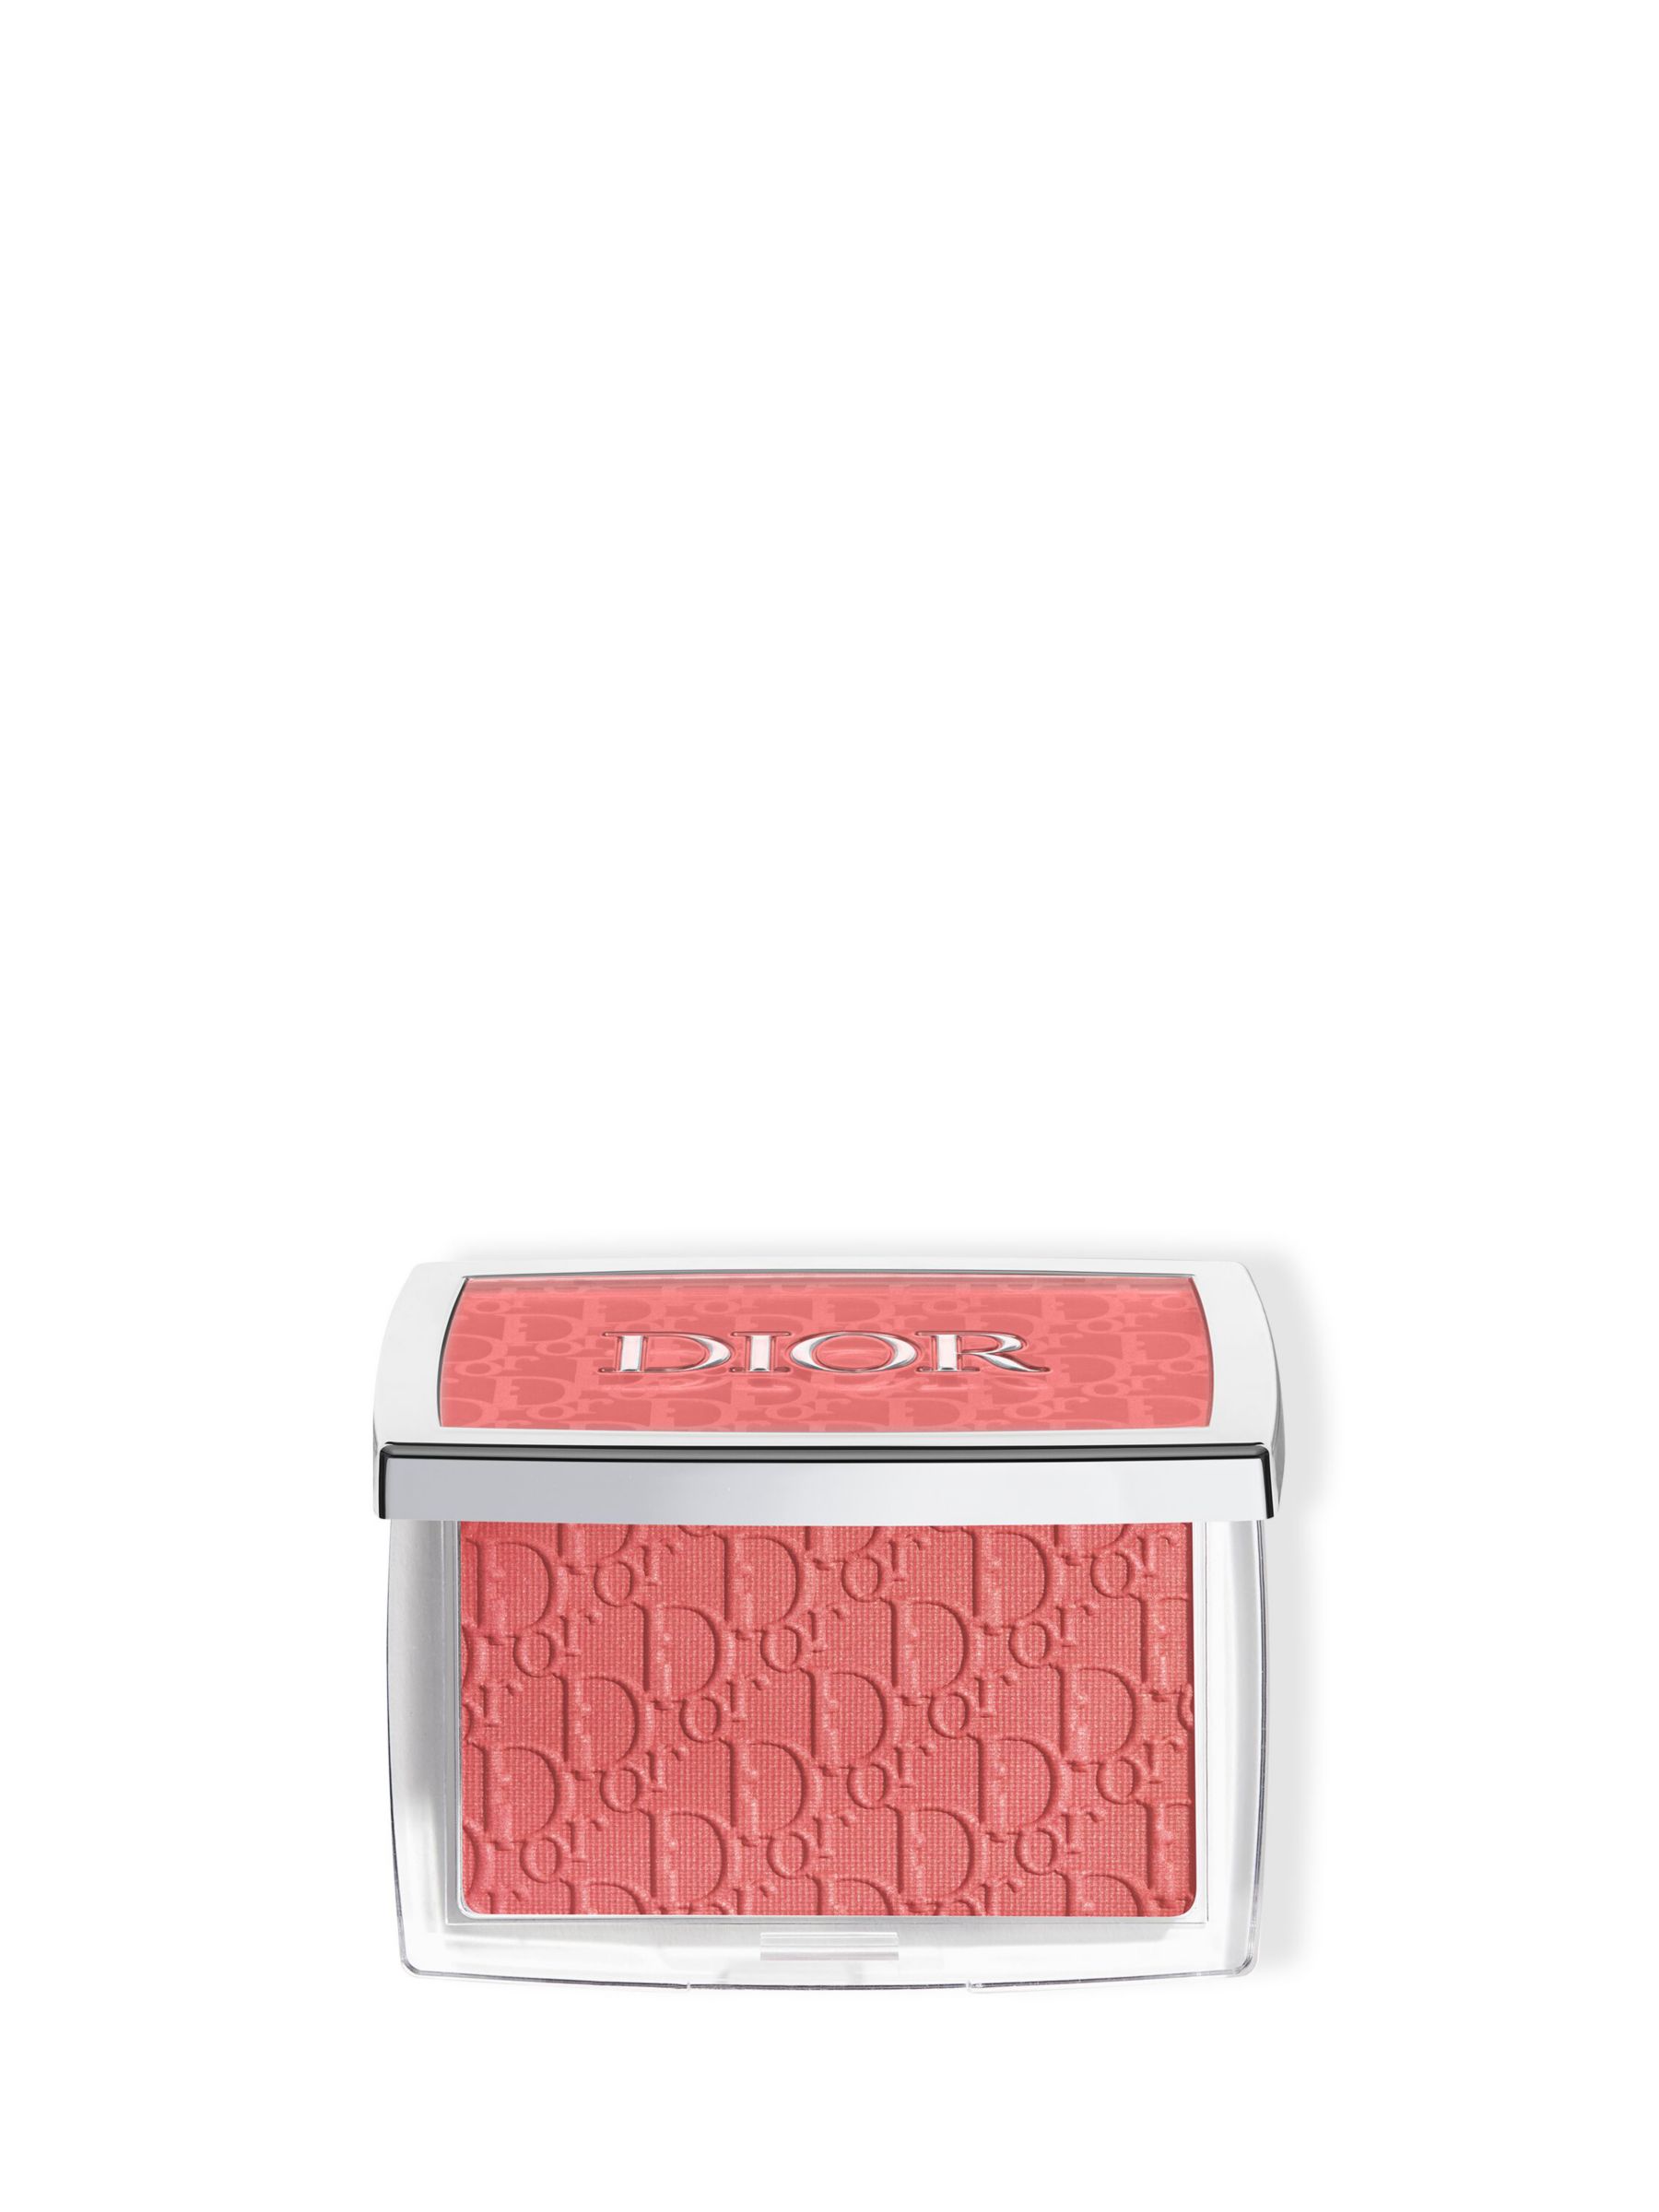 DIOR Backstage Rosy Glow, 012 Rosewood